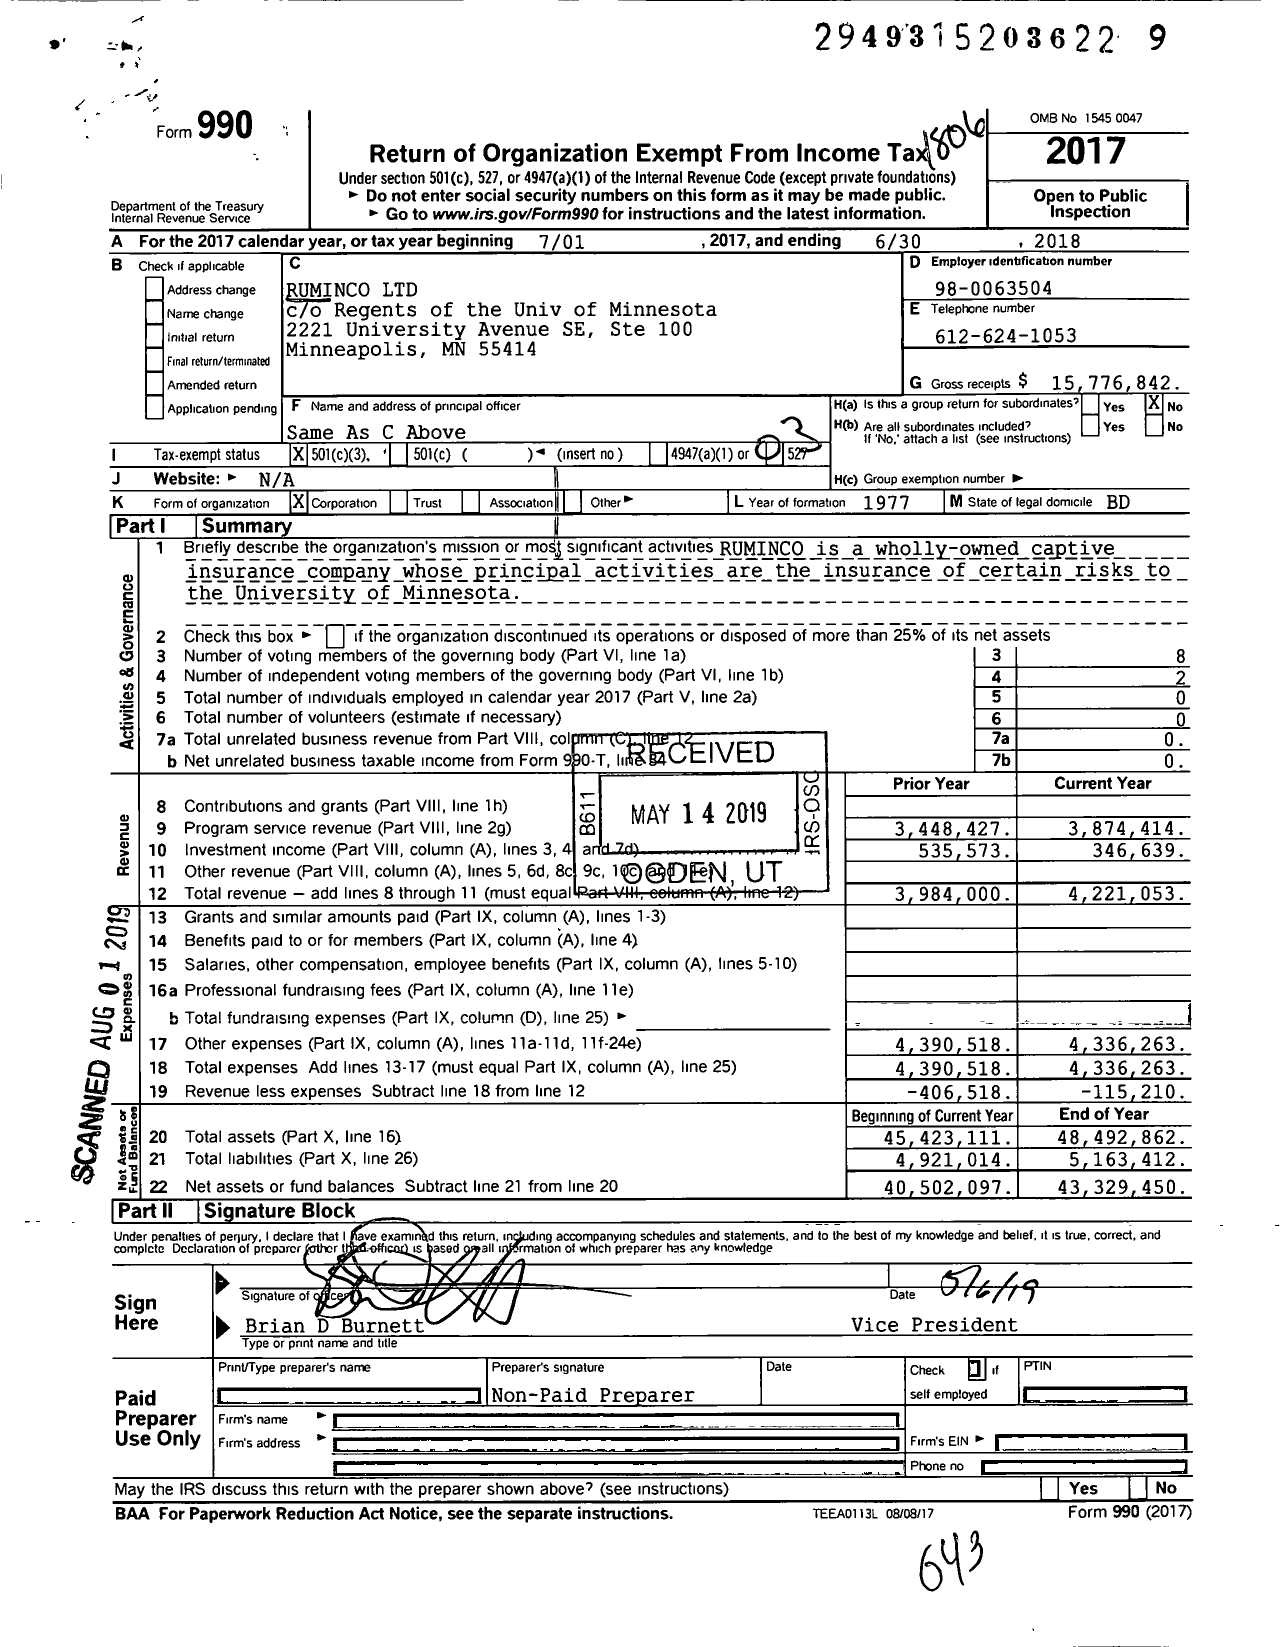 Image of first page of 2017 Form 990 for Ruminco